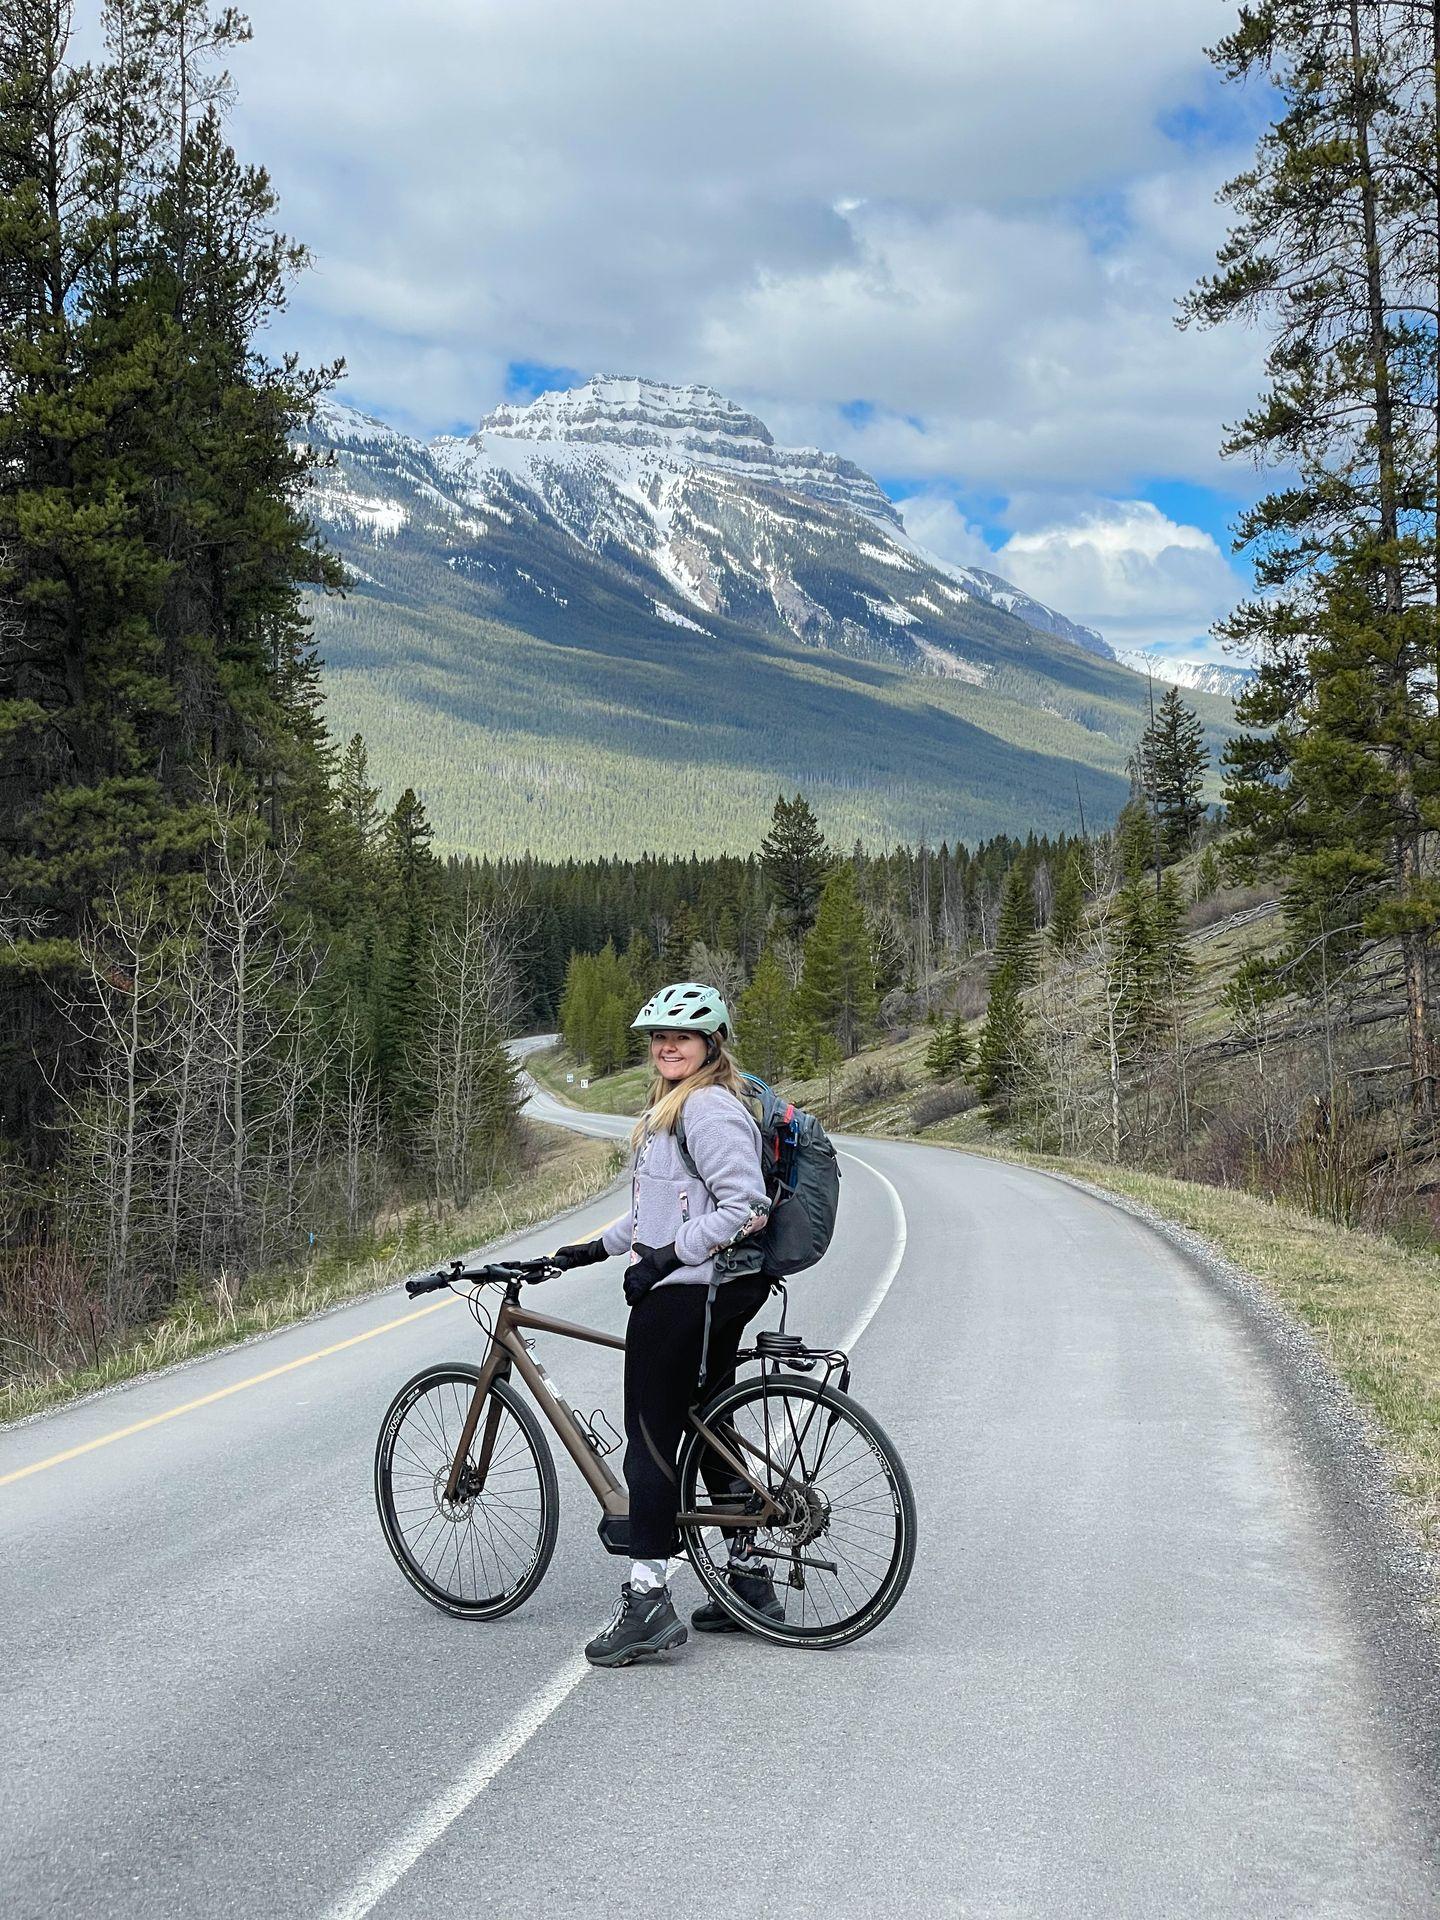 Lydia standing with a bike near Banff. There is a large mountain in the distance